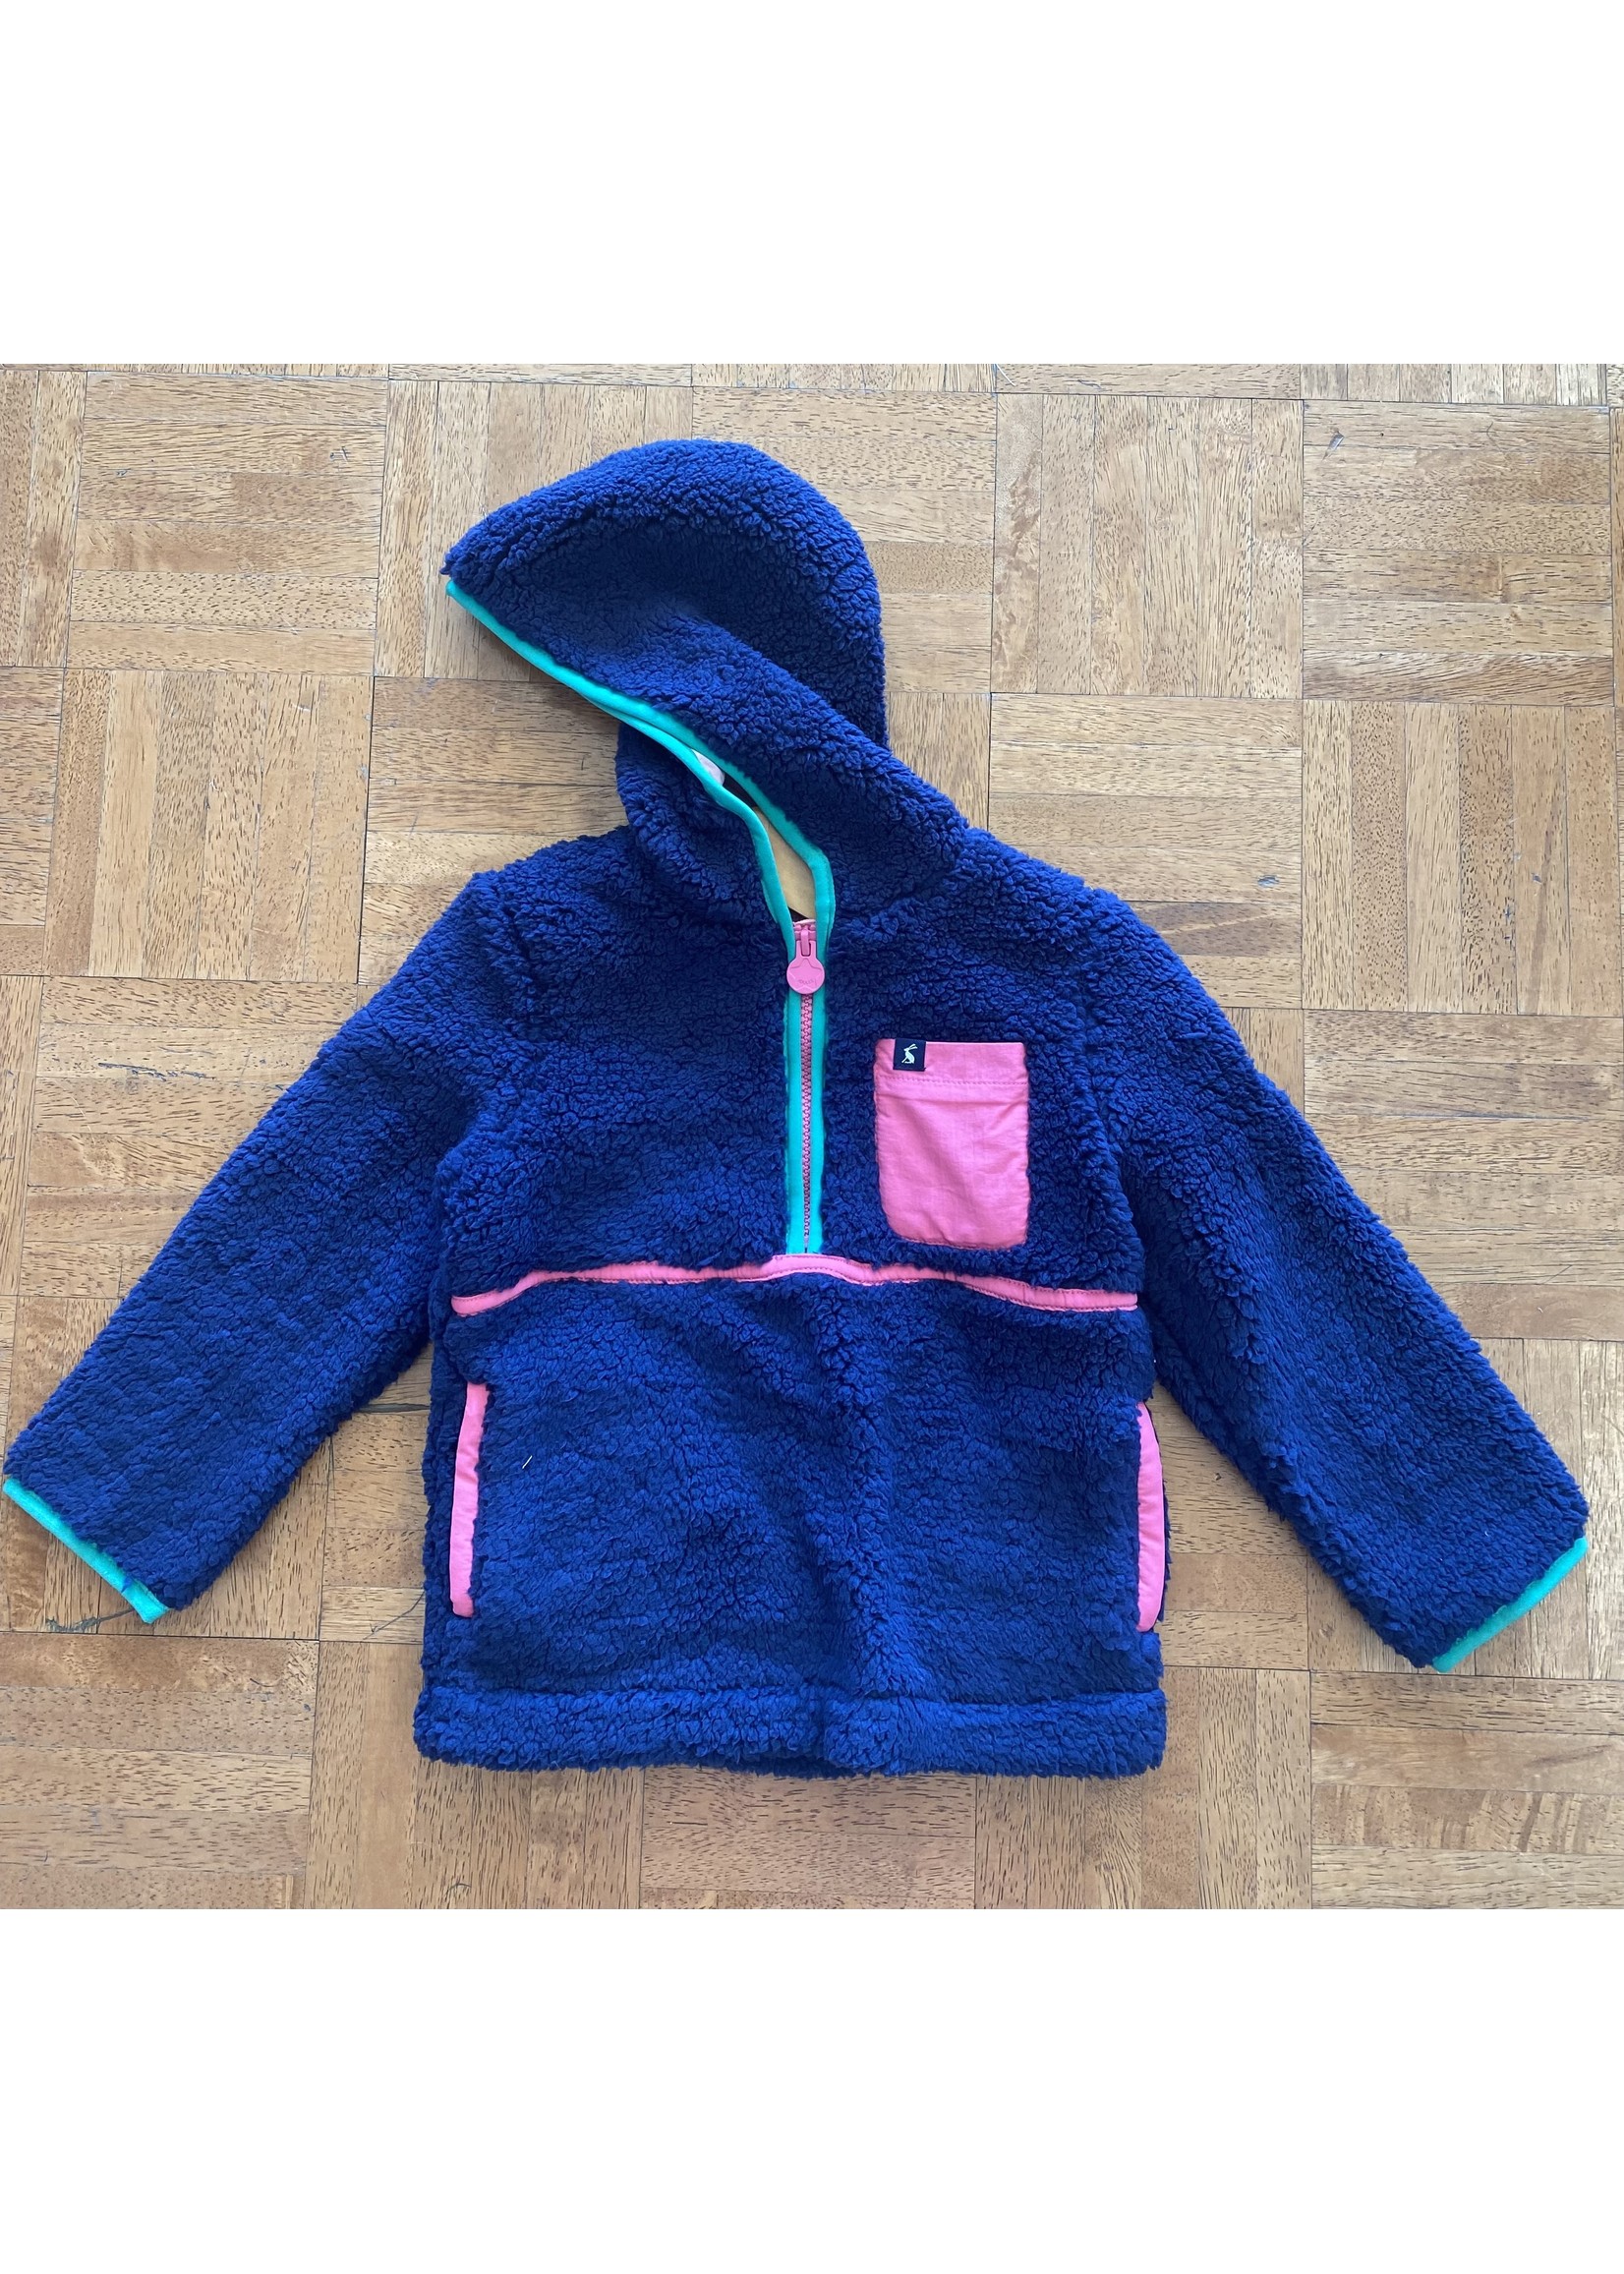 Joules Joules Navy Fleece with Pink Pocket